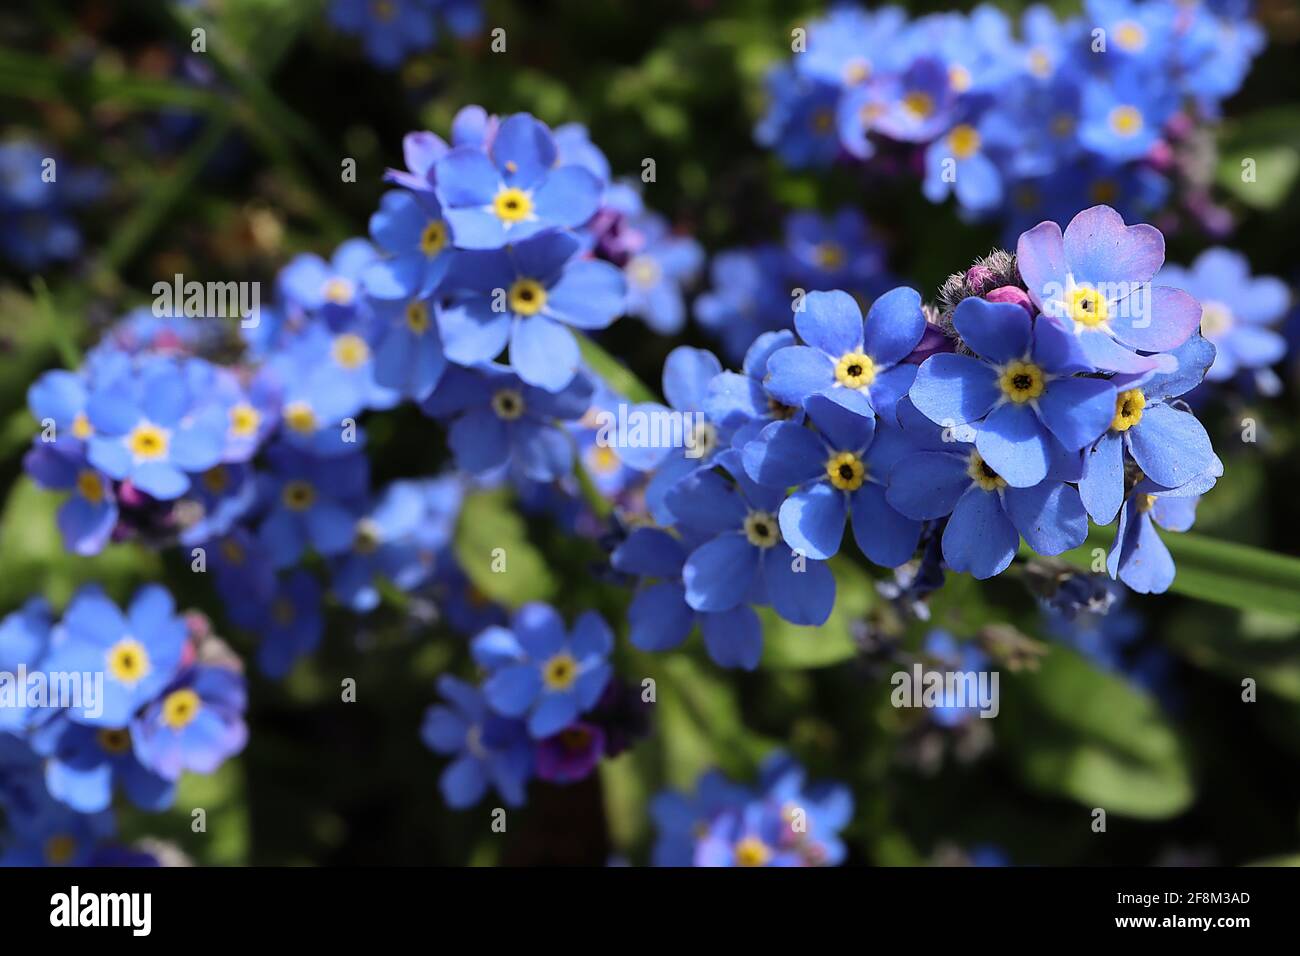 Myosotis sylvatica Blue Wood forget-me-nots - star-shaped blue flowers with yellow and white centres, March, England, UK Stock Photo